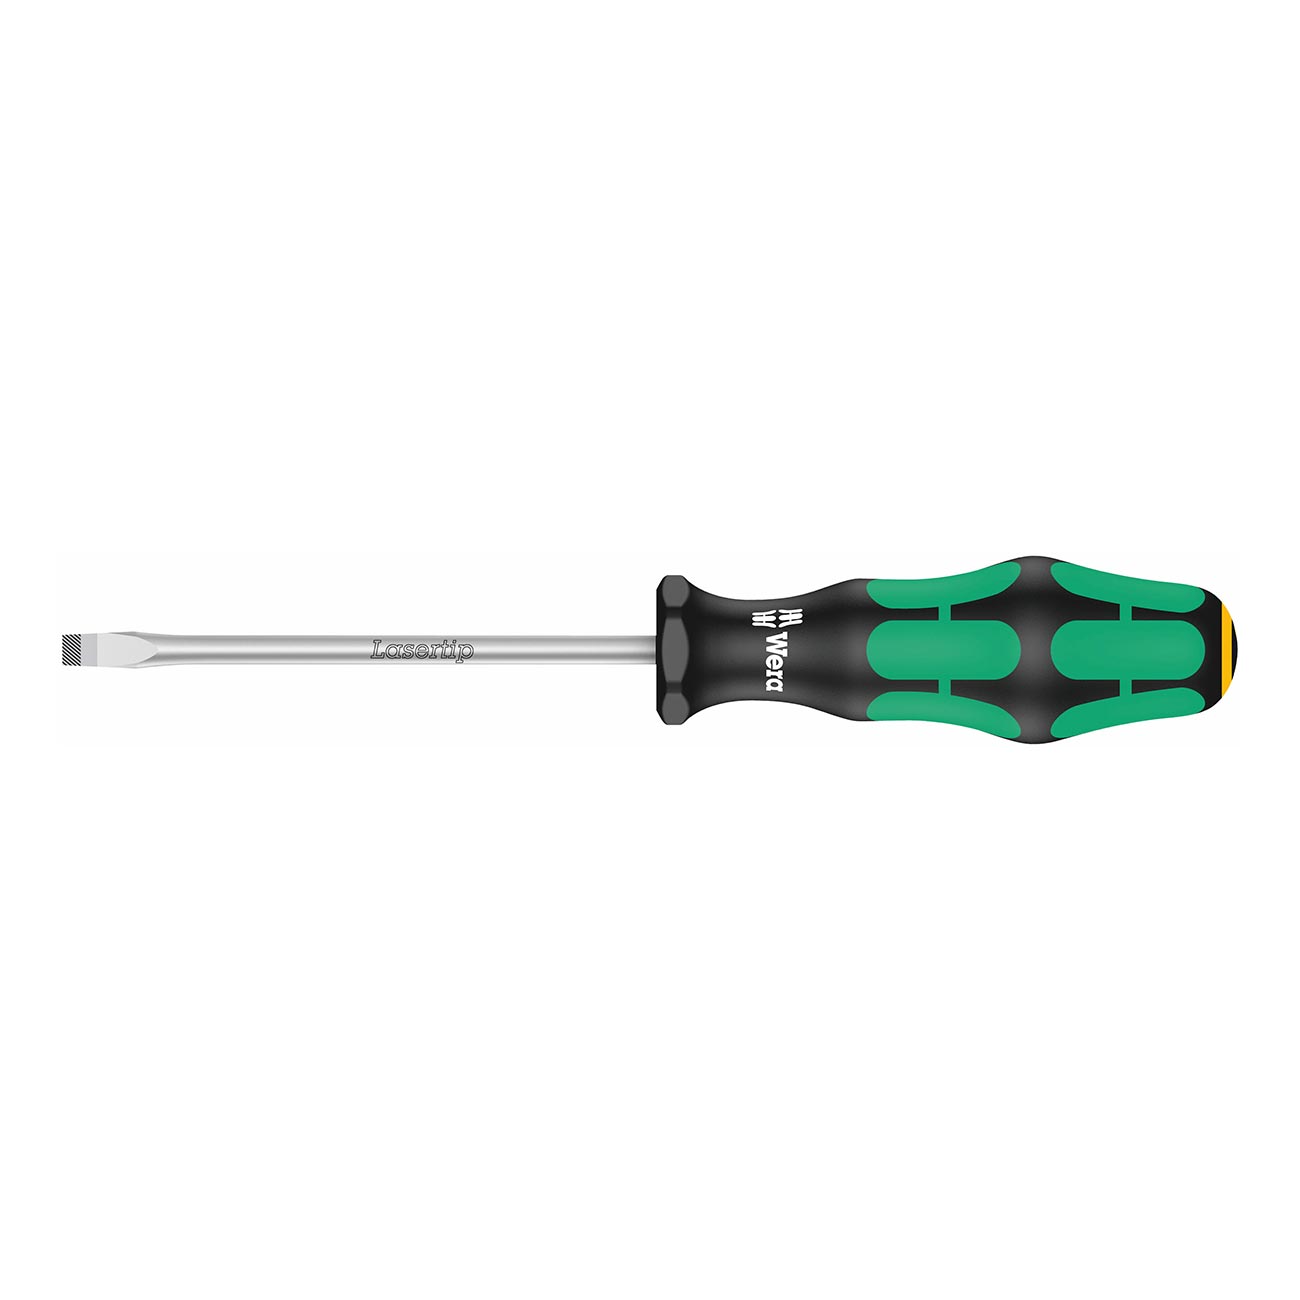 Wera Screwdriver: Slotted 6.5mm x 200mm (With LaserTip)